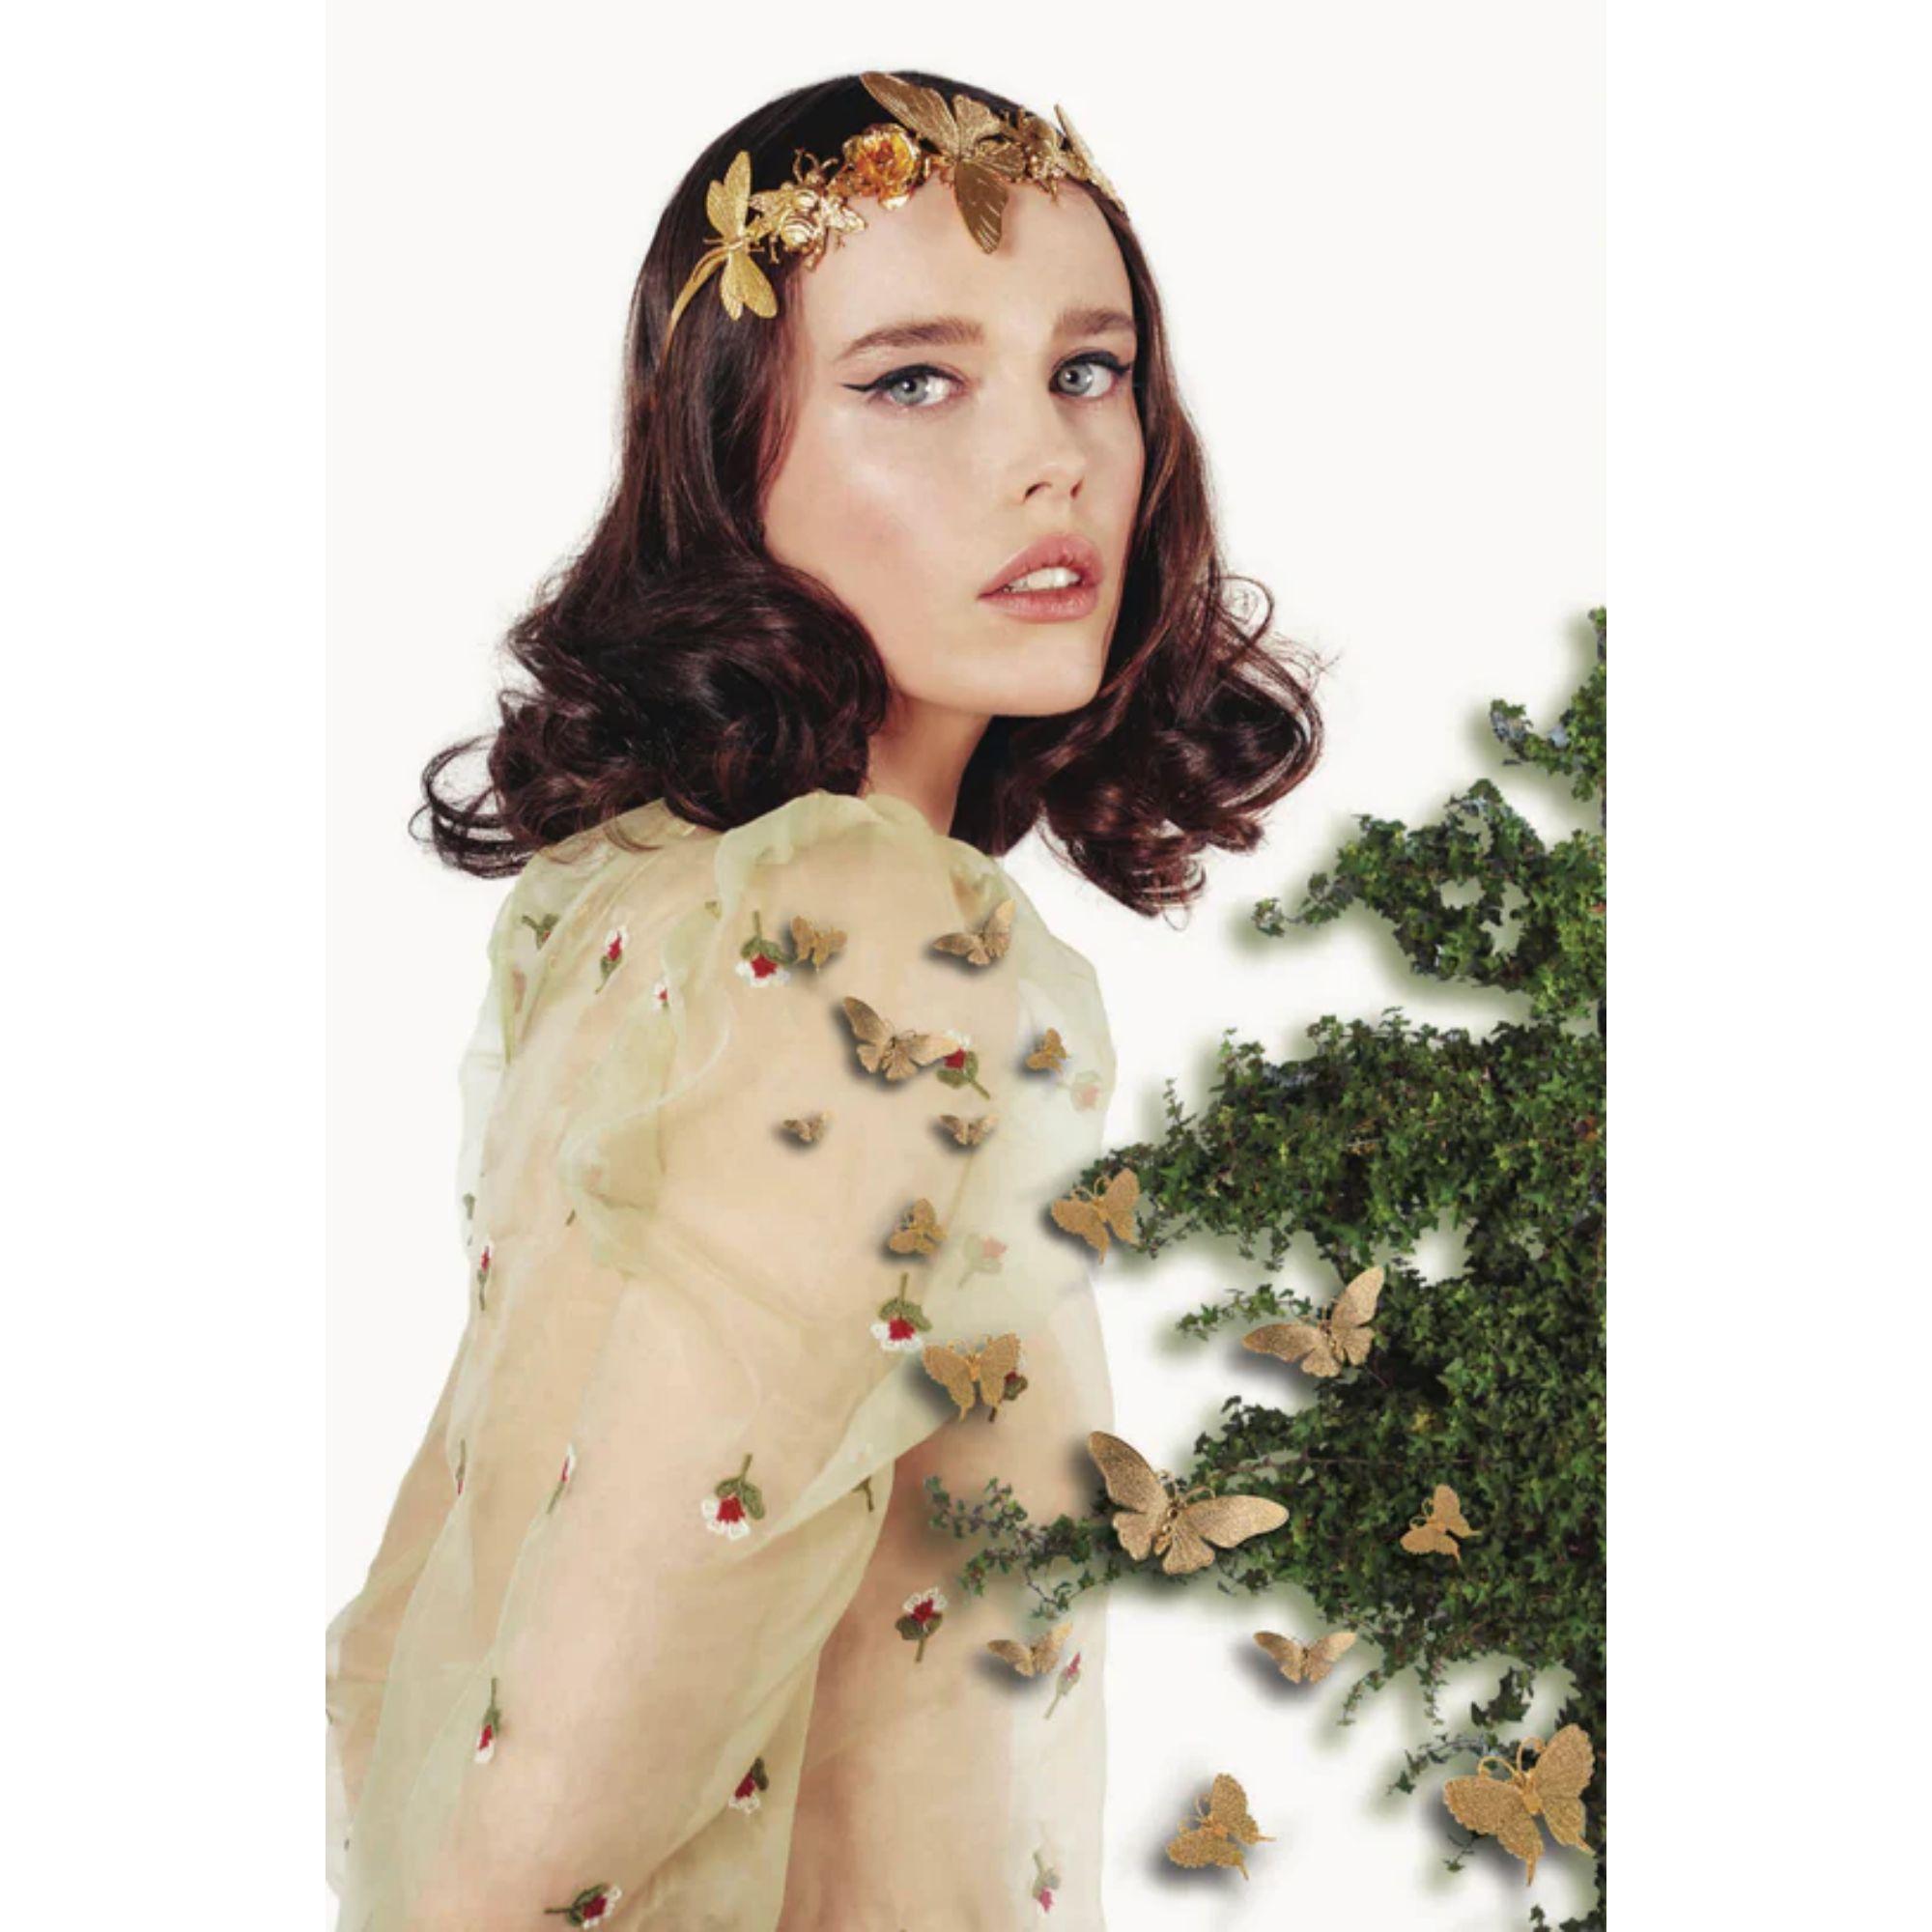 The headpiece that puts all of MORDEKAI's creatures together for a stunning array of an opulent garden and its inhabitants. This luxurious piece really captures the fantasy of the garden of Eden and the majesty of nature. Available in 24k gold,